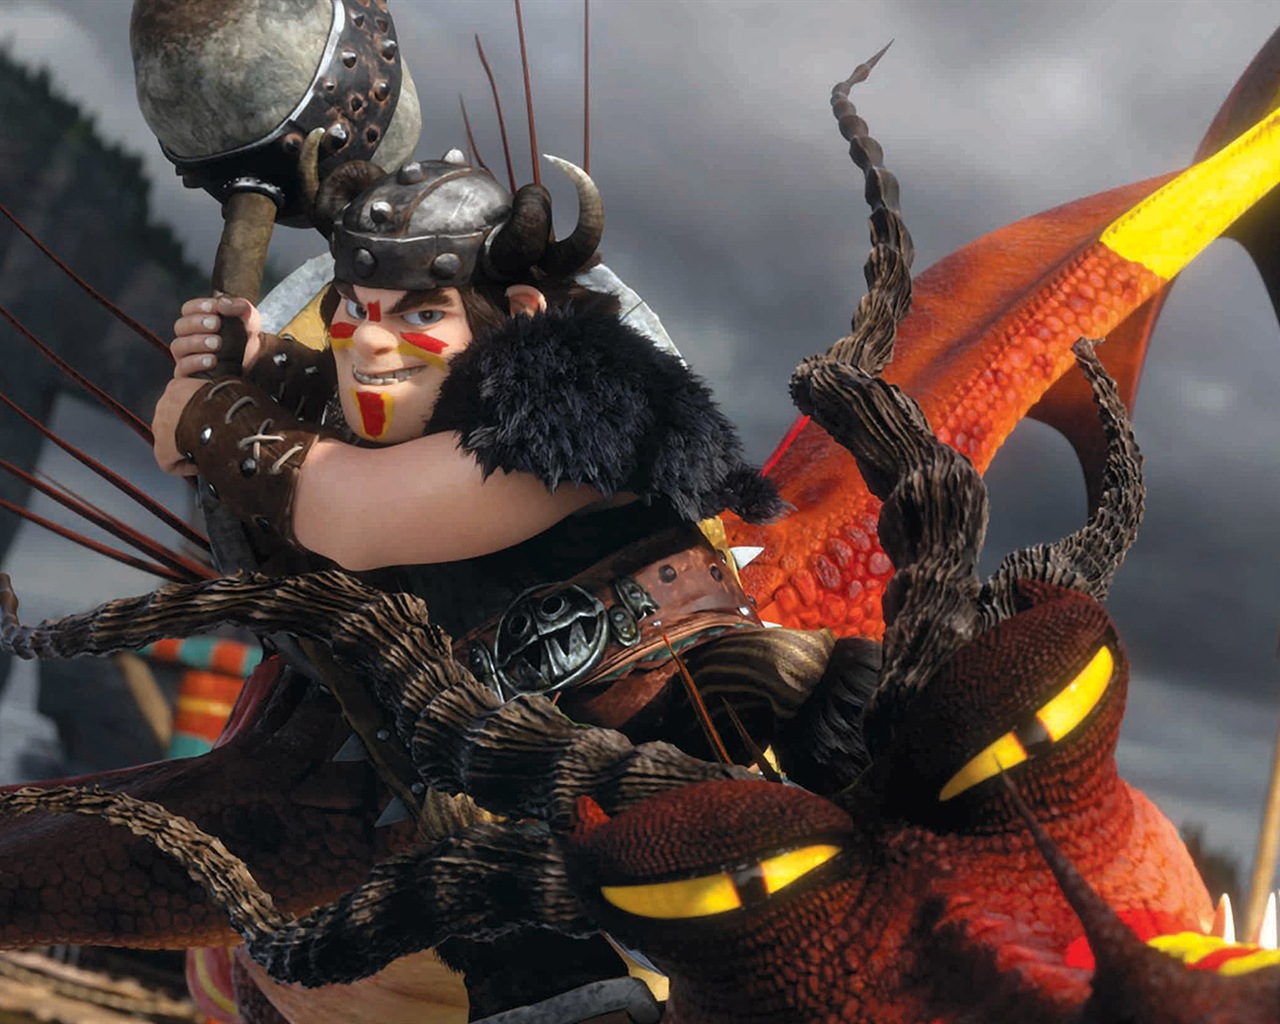 How to Train Your Dragon 2 HD wallpapers #12 - 1280x1024